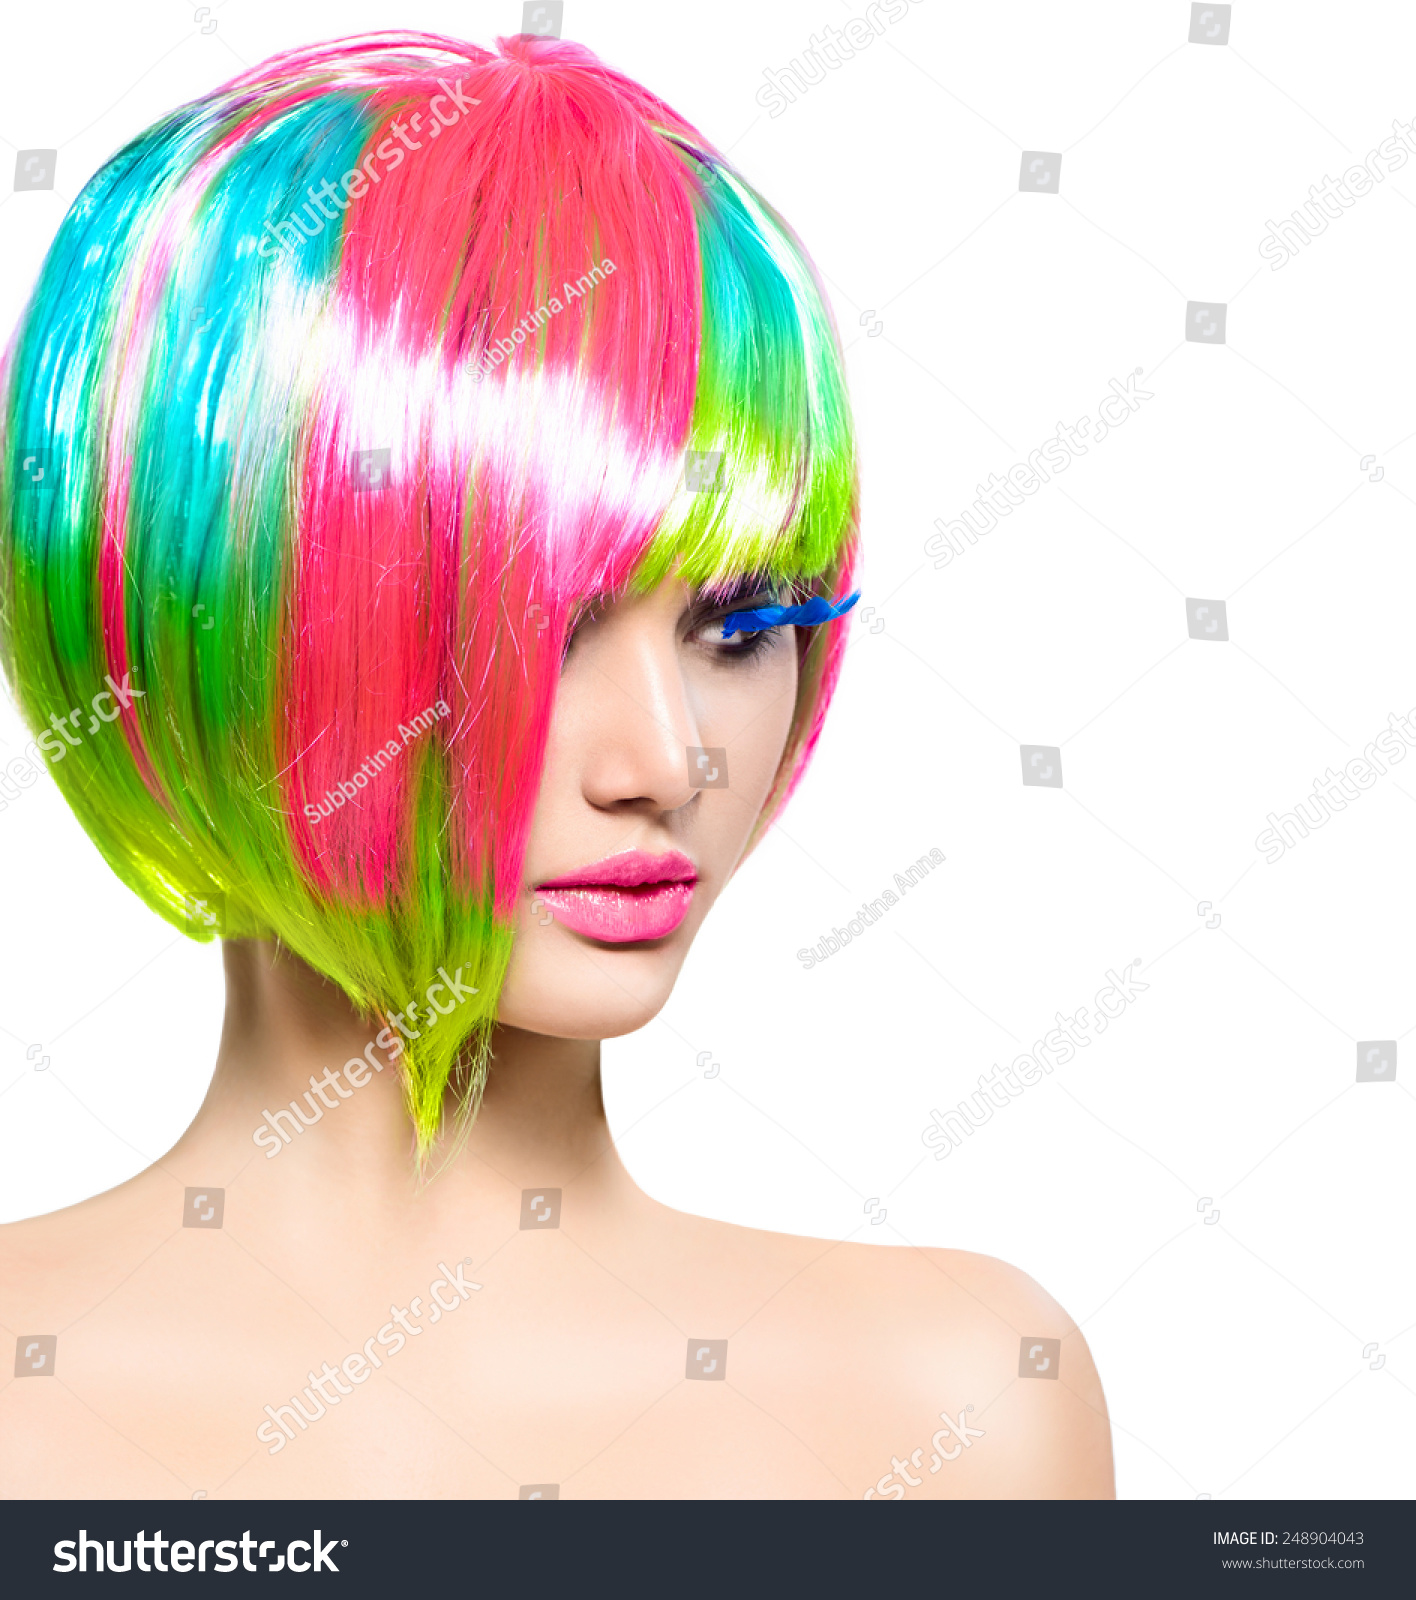 Beauty Fashion Model Girl Colorful Dyed Royalty Free Stock